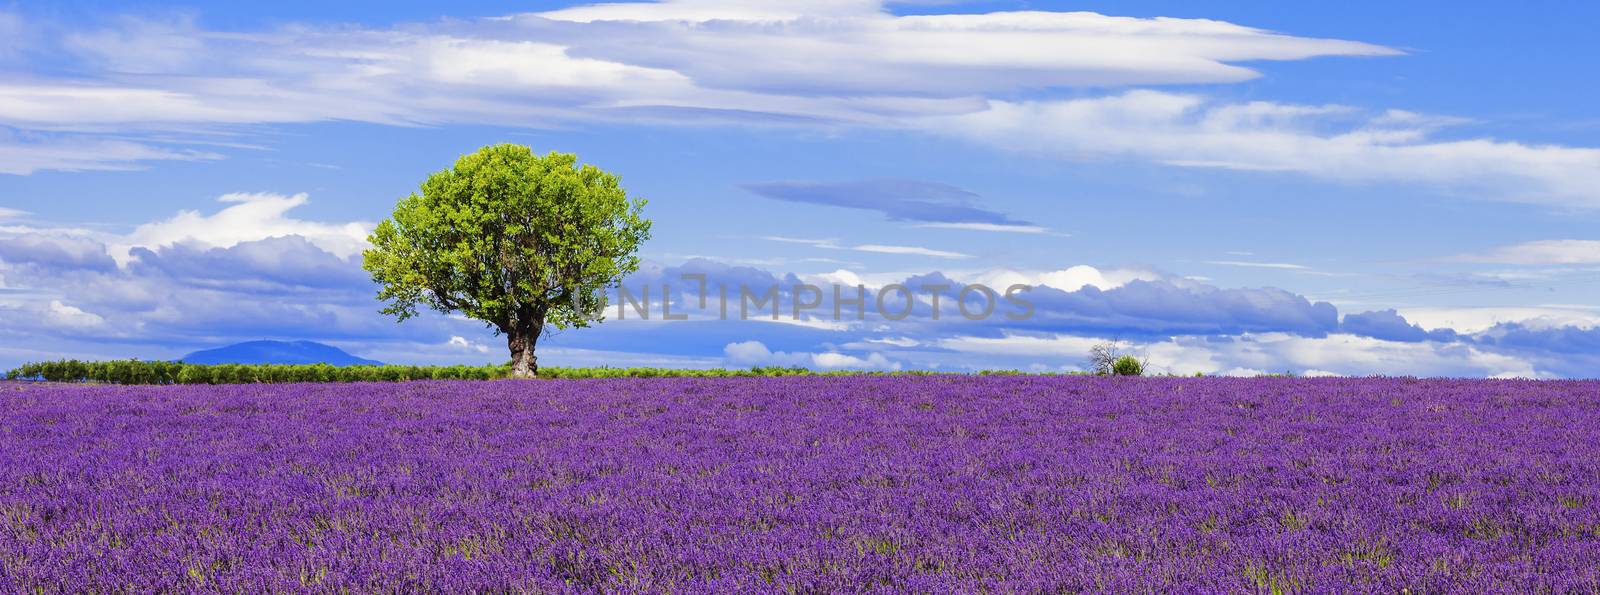 Panoramic view of lavender field with tree by vwalakte